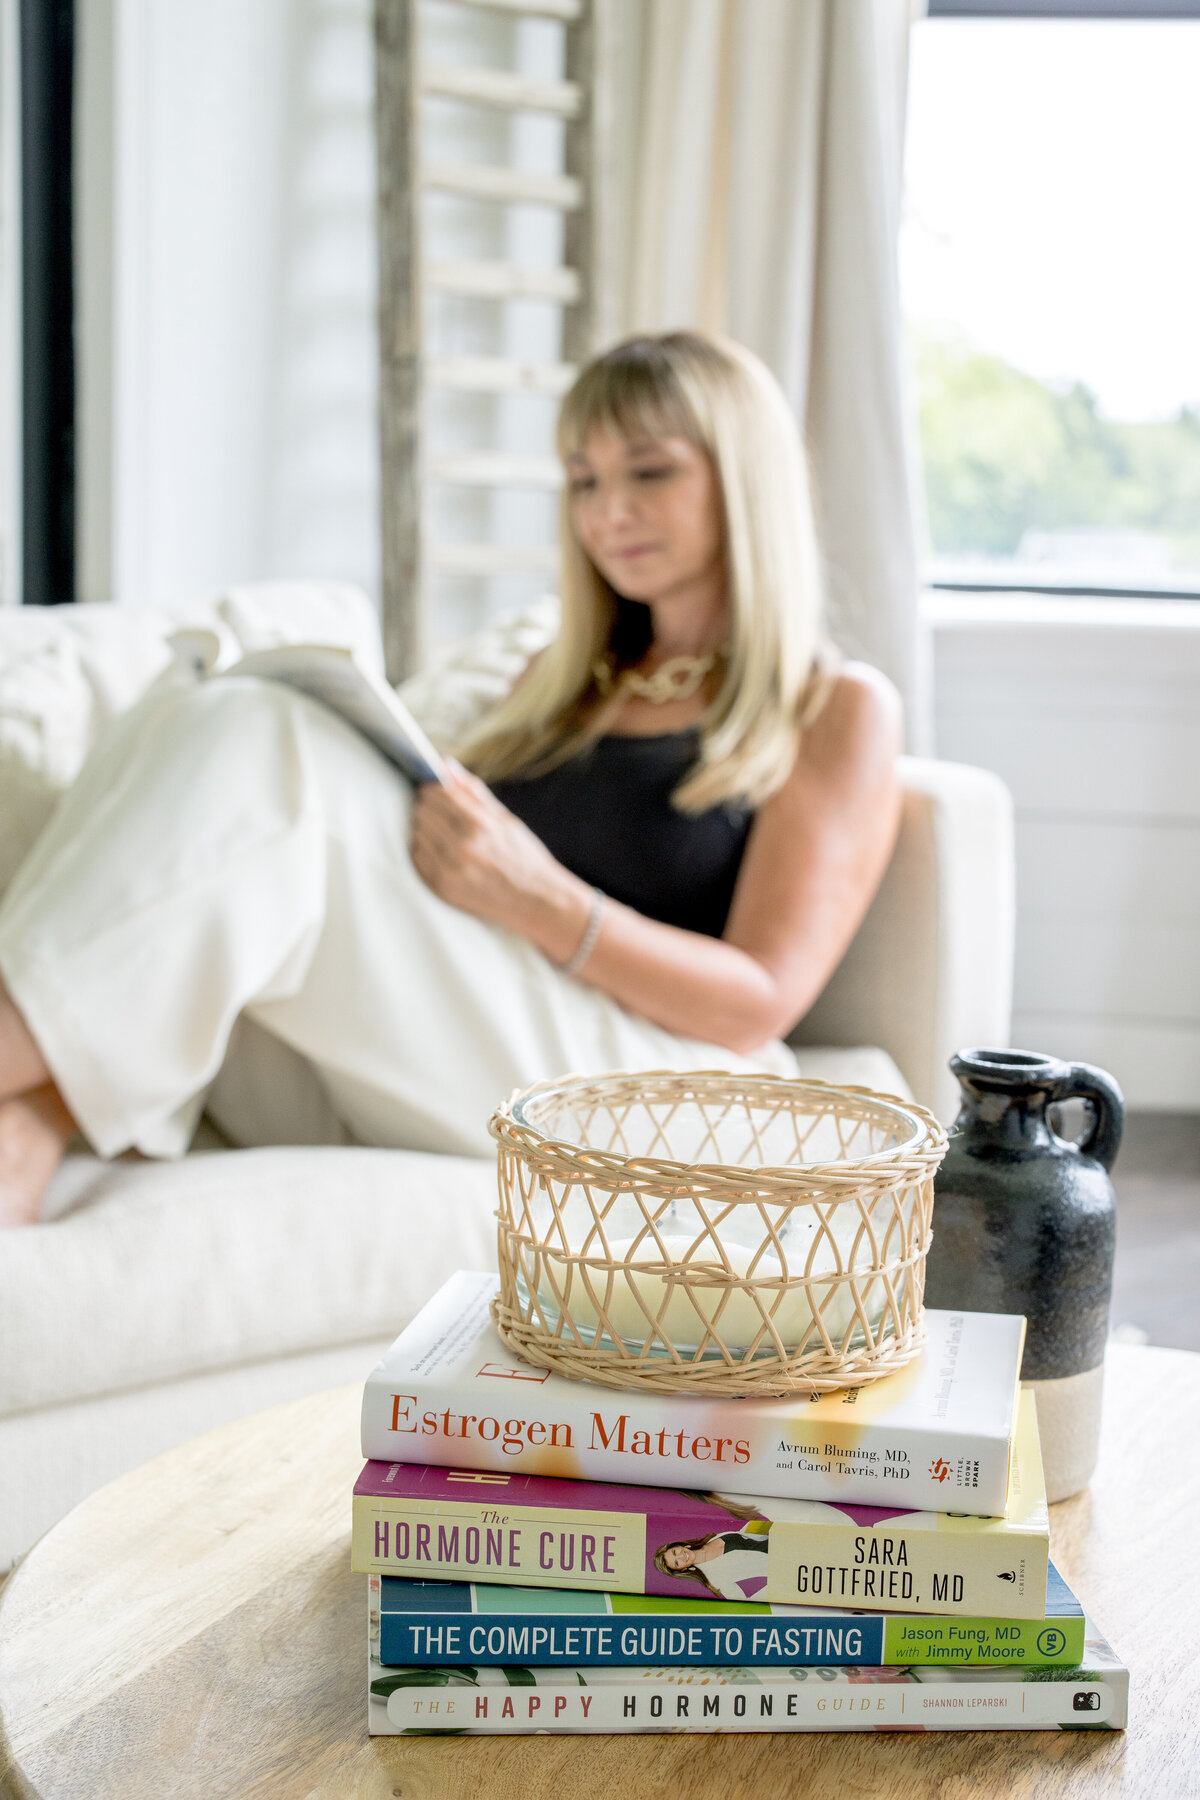 Brand photo of women in the background sitting on a white sofa in the living room reading a book and in front of her is a pile of books on a coffee table for her brand photo shoot